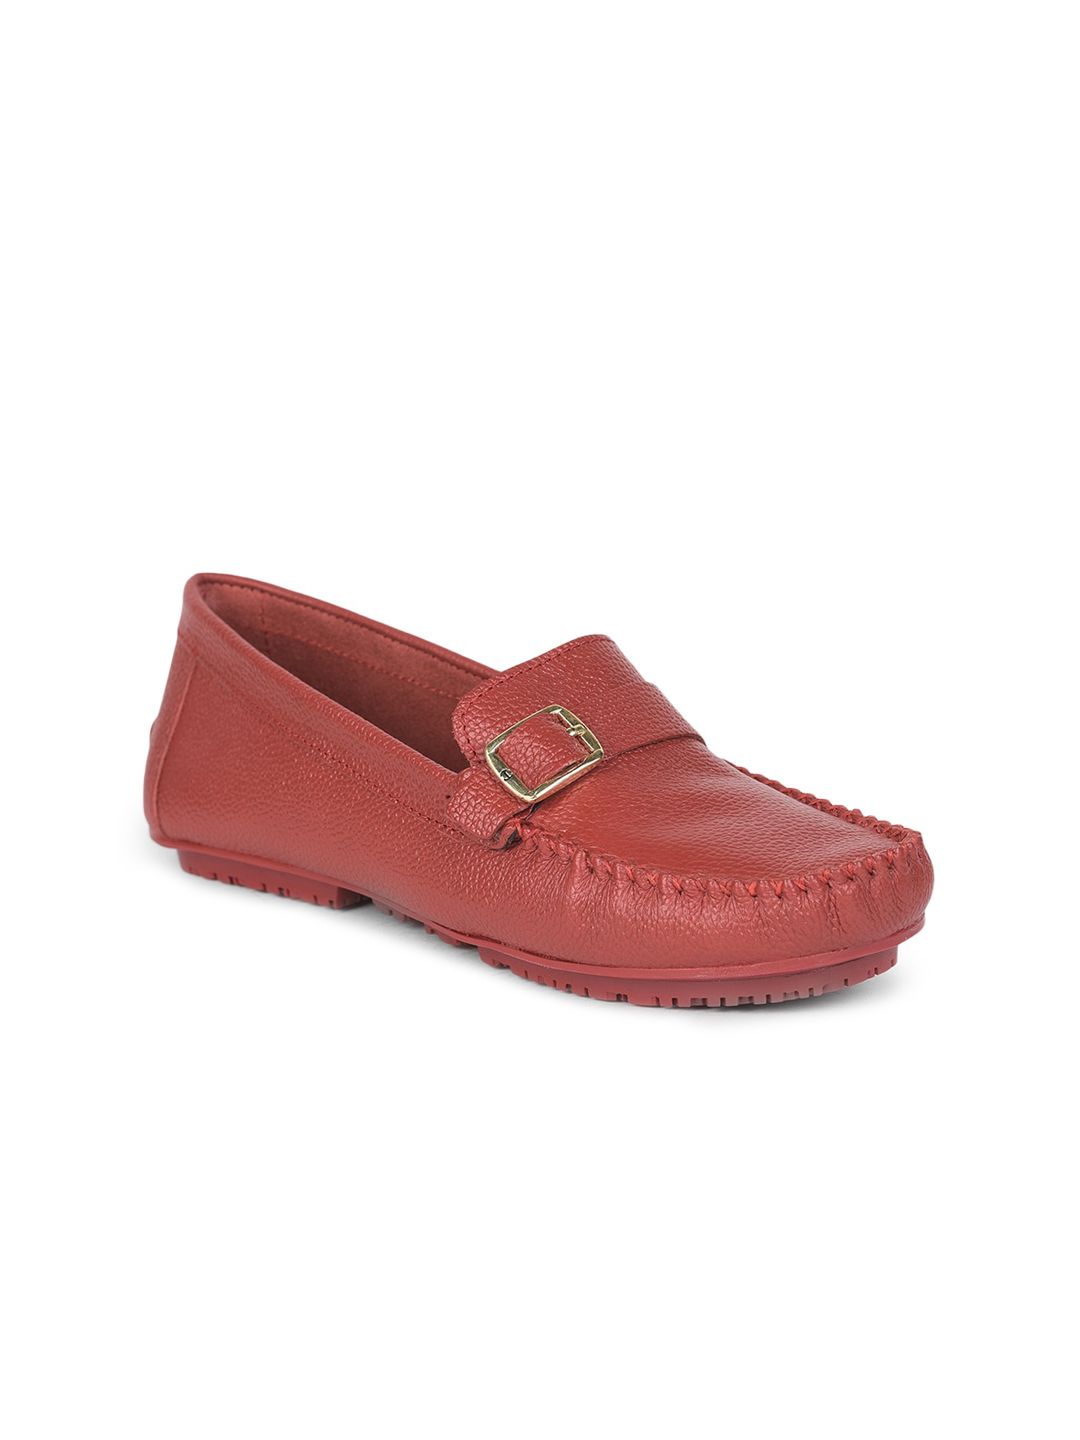 Liberty Women Red Loafers Price in India